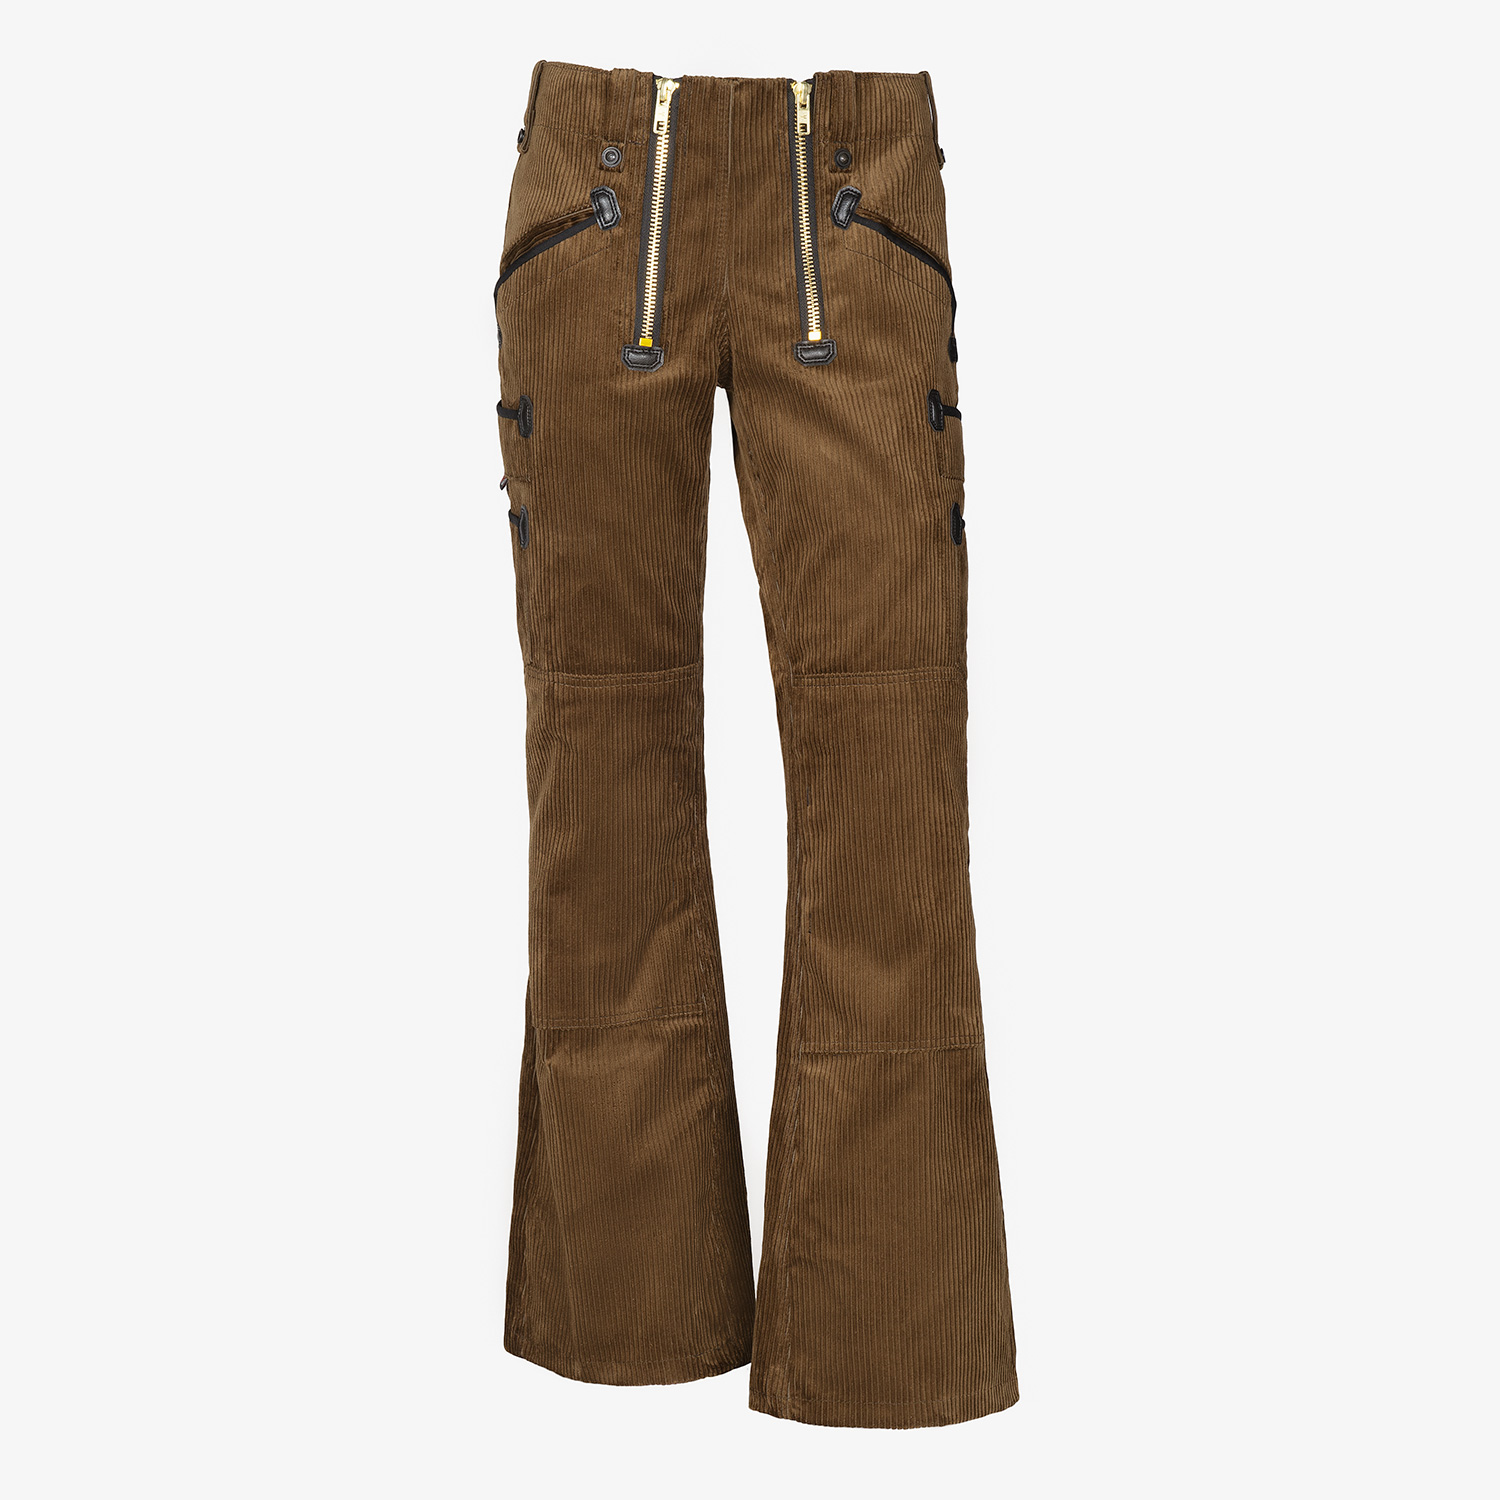 JACK guild trousers corduroy with bell bottom